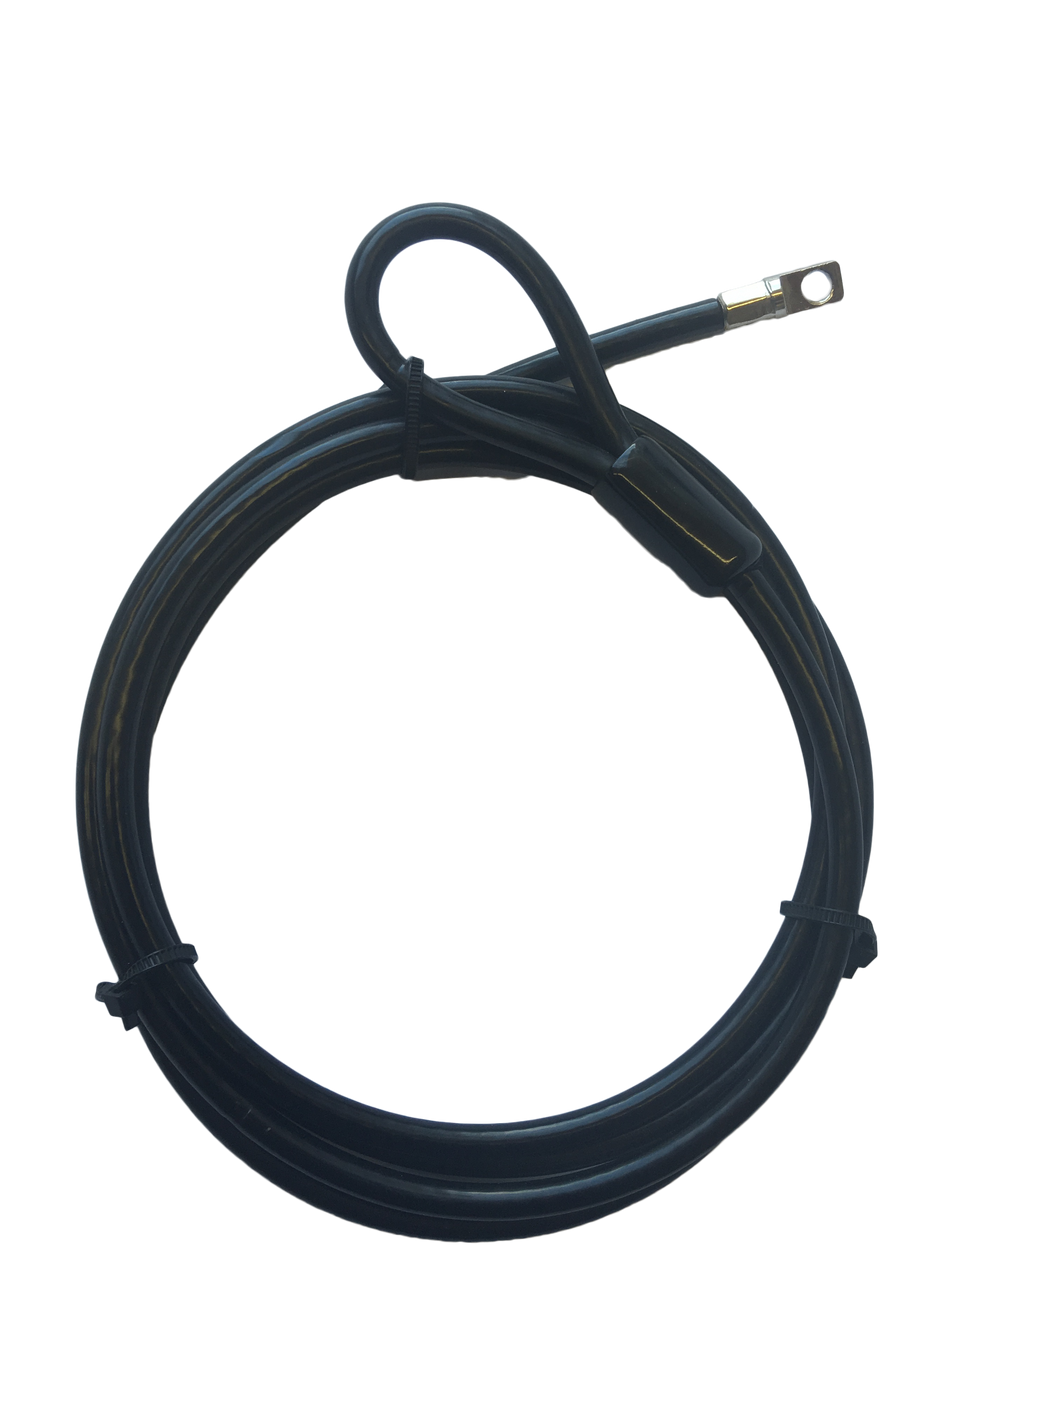 6mm looped security cable with cross drilled hole